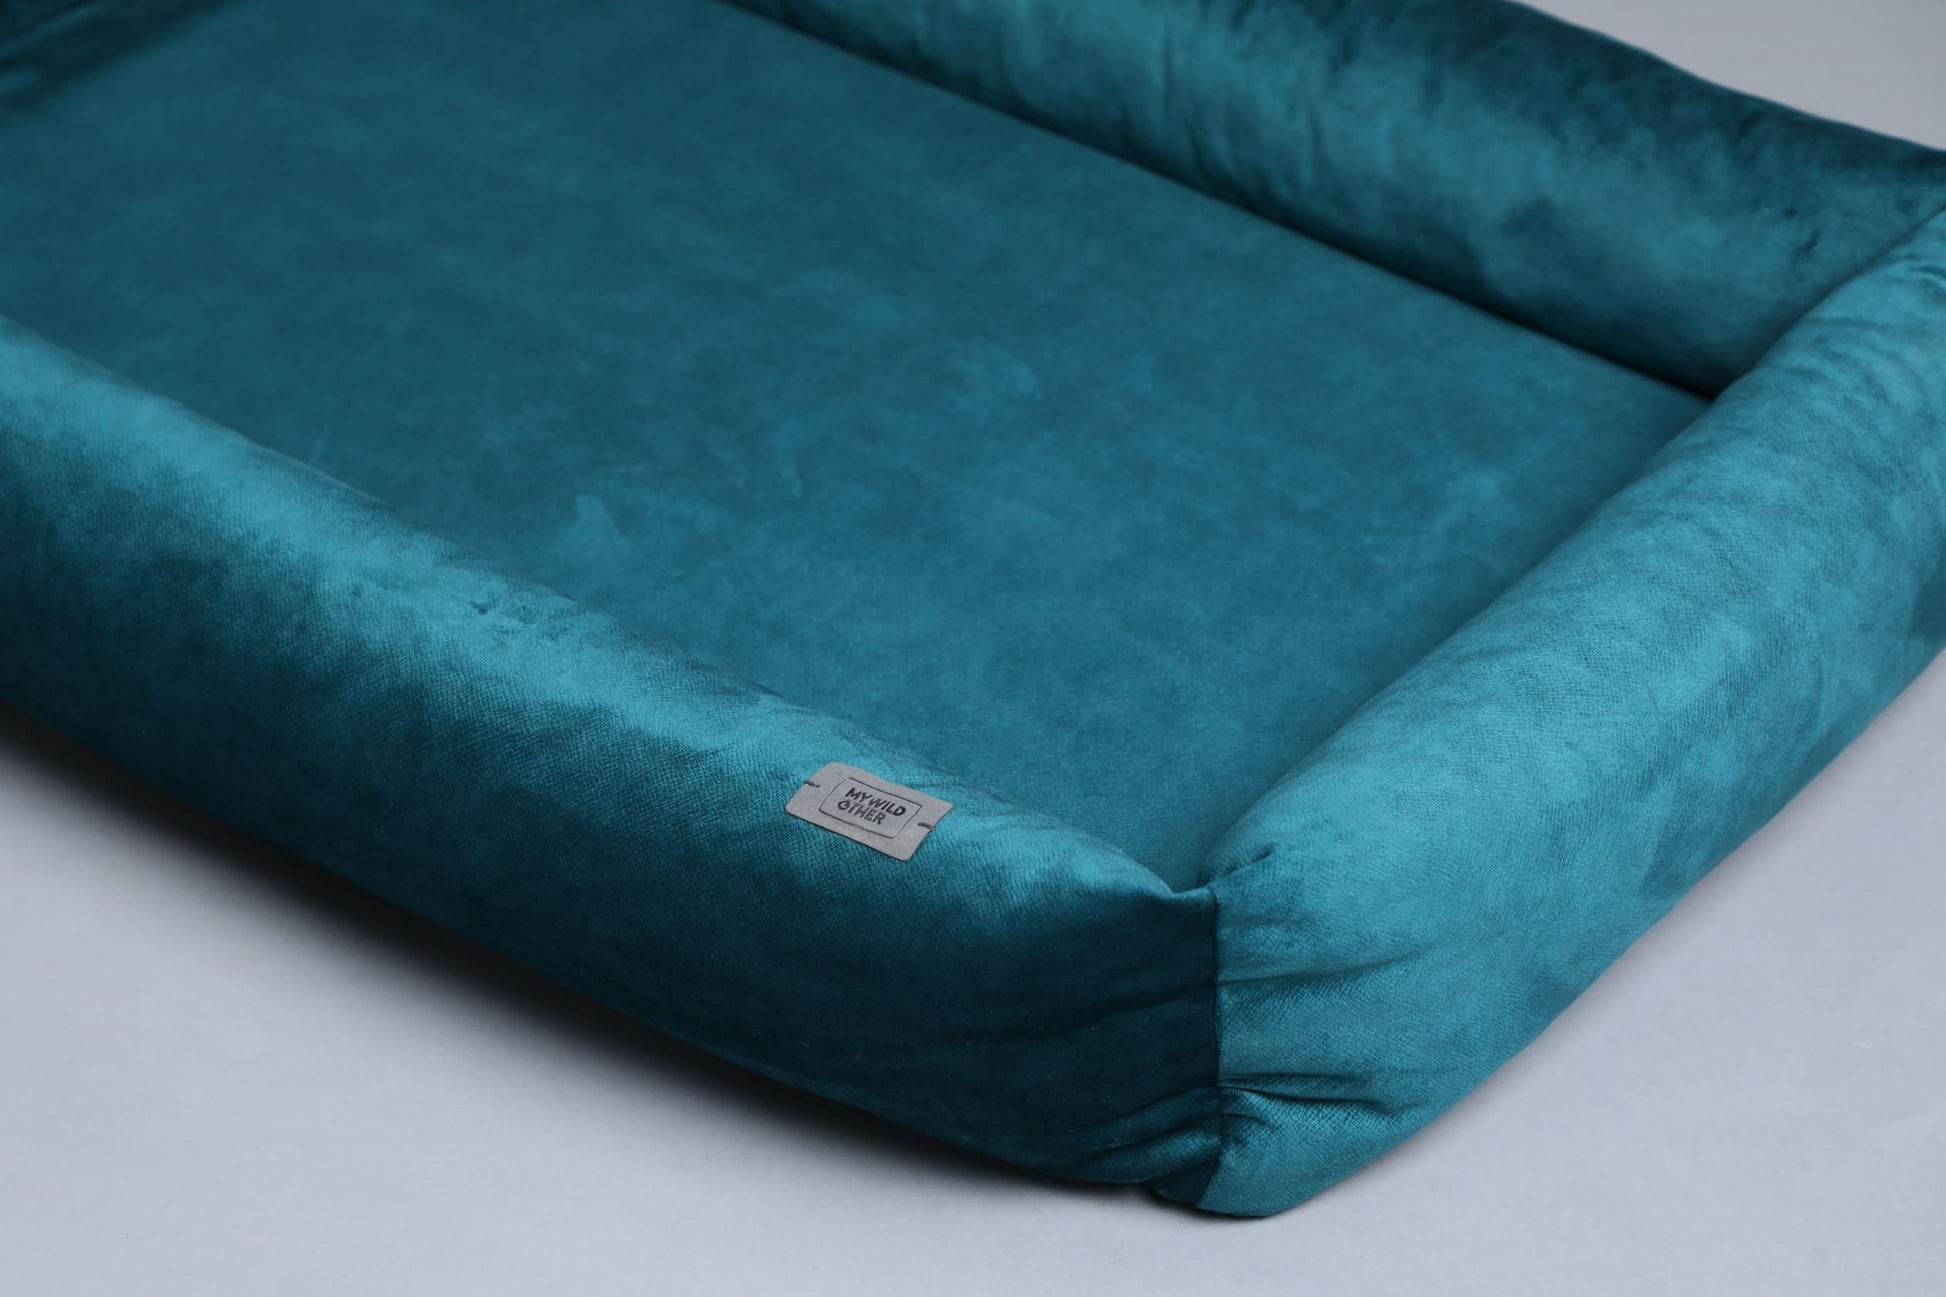 2-sided dog bed with sides. OCEAN BLUE - premium dog goods handmade in Europe by My Wild Other